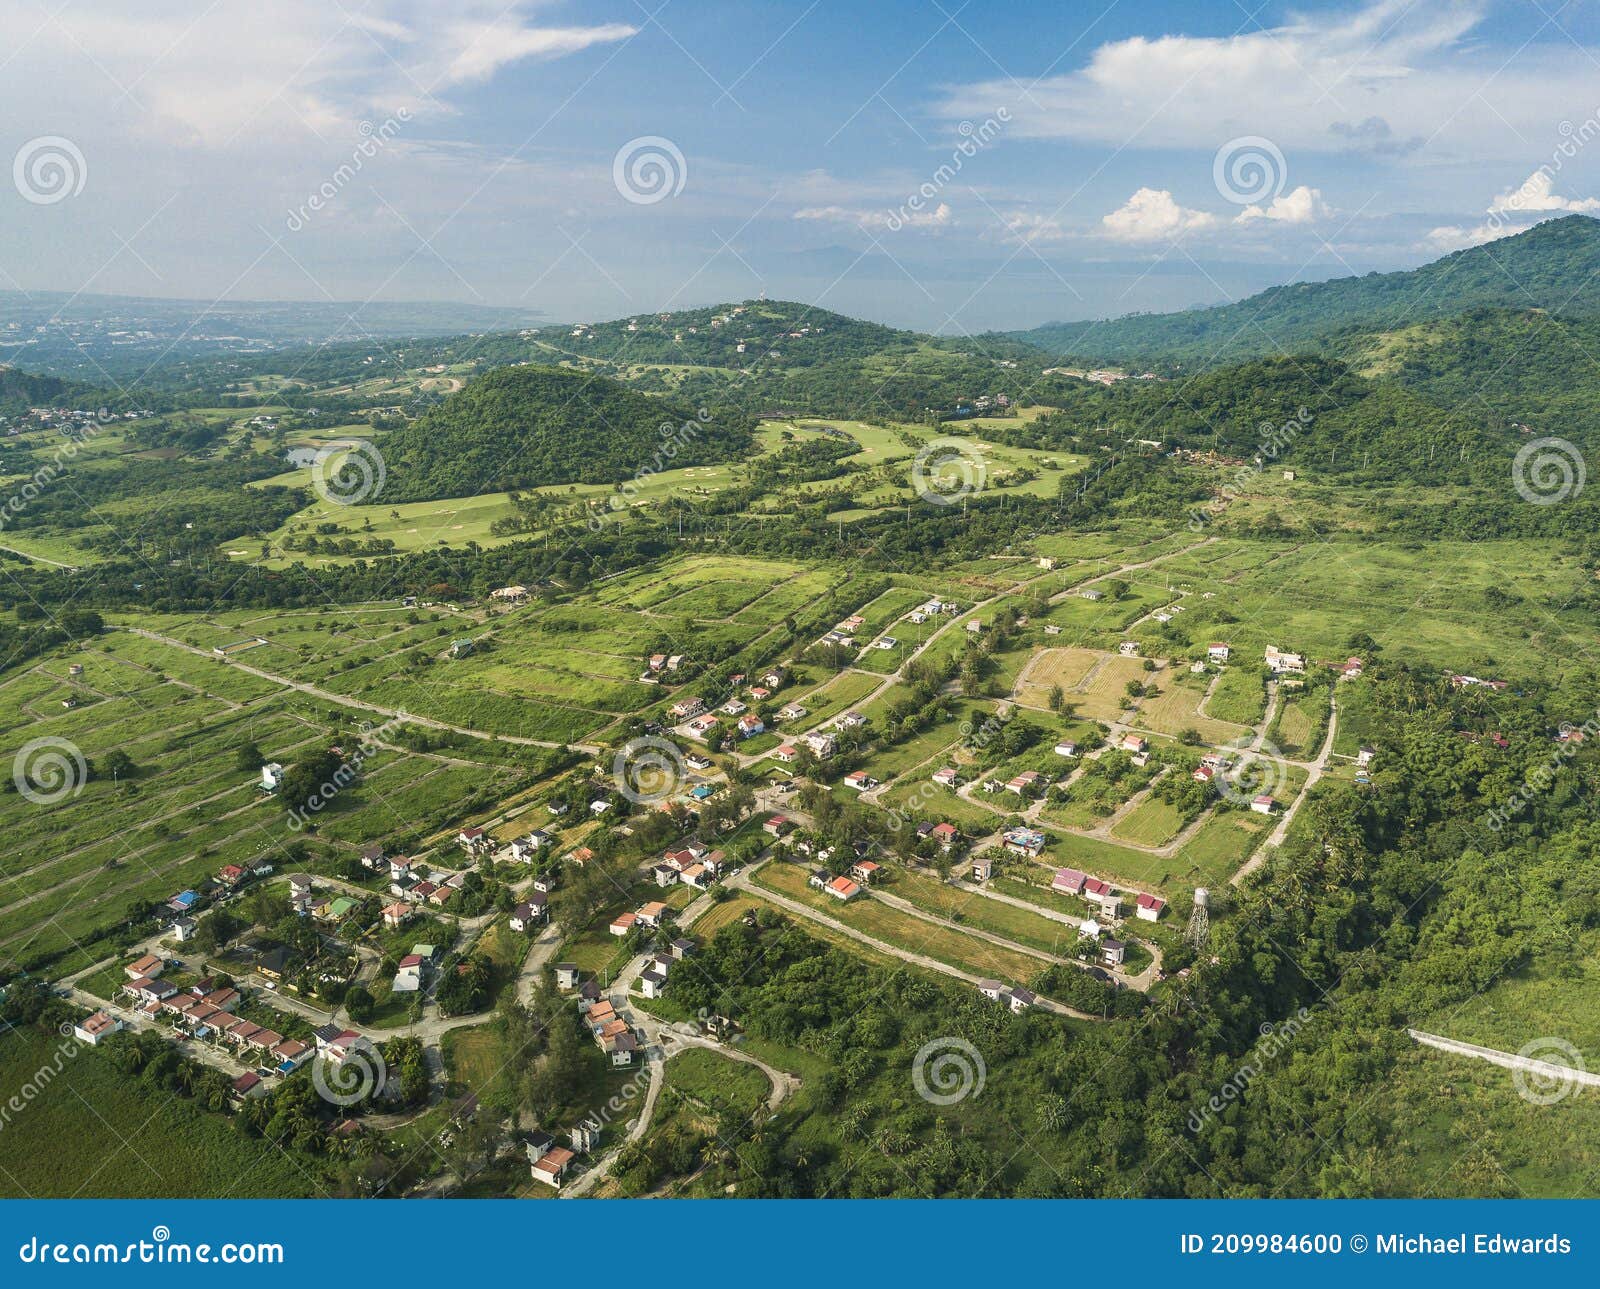 aerial of a residential development at the foothills of mount makiling. a relatively uncrowded subdivision in santo tomas batangas